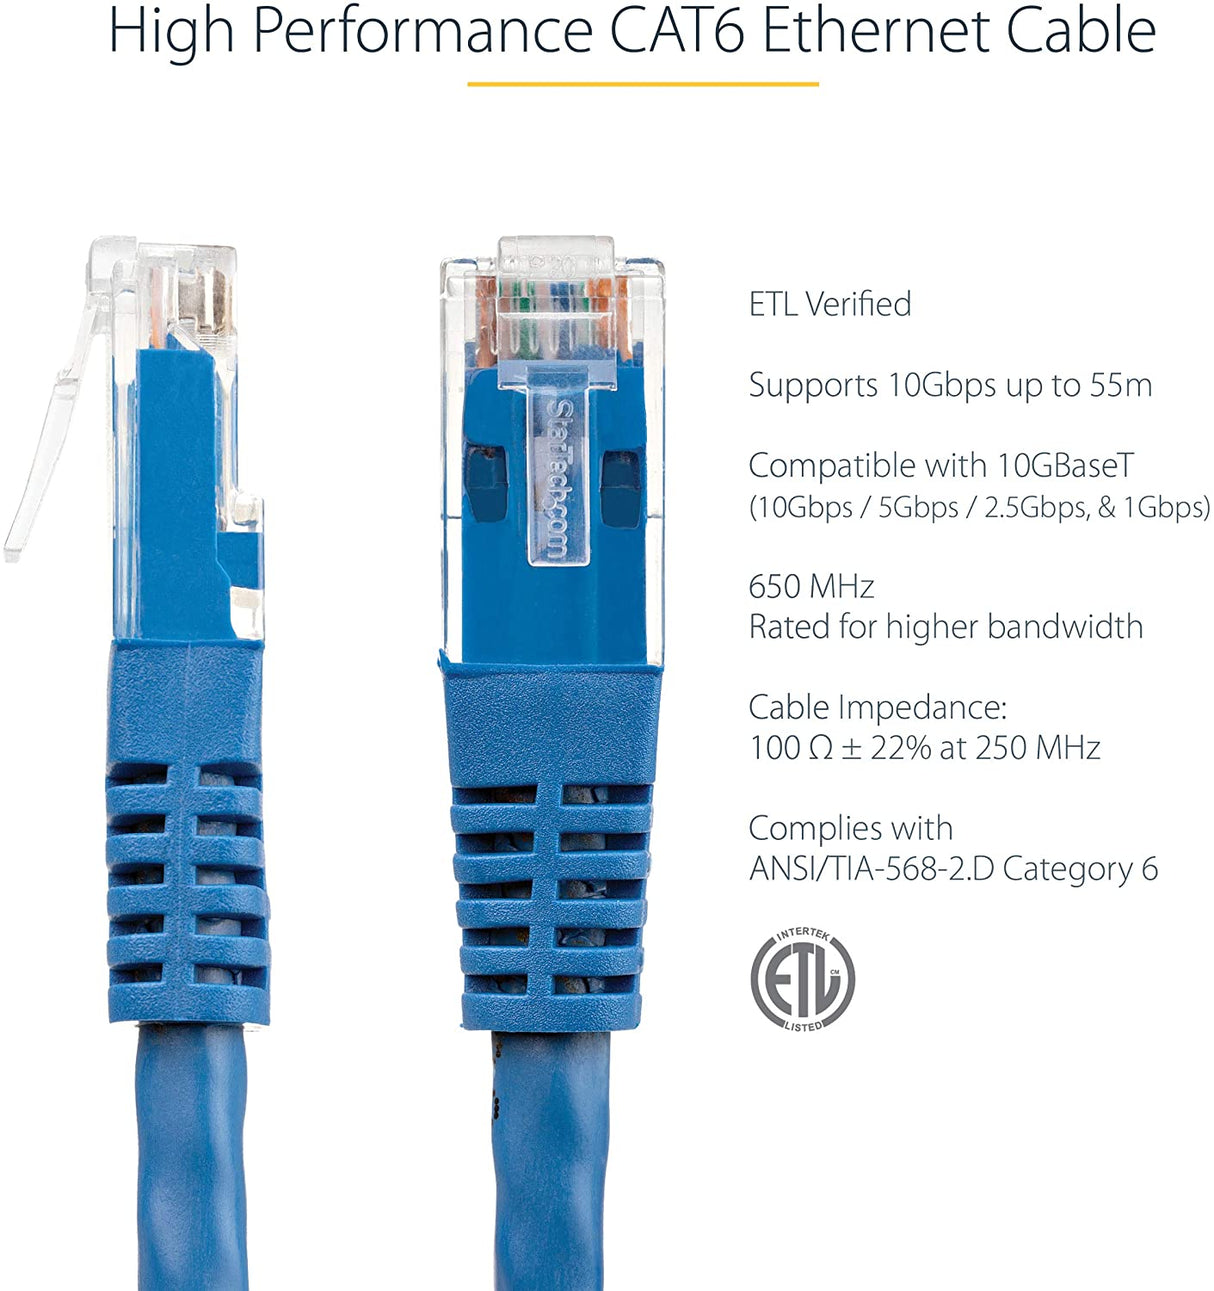 StarTech.com 15ft CAT6 Ethernet Cable - Blue CAT 6 Gigabit Ethernet Wire -650MHz 100W PoE++ RJ45 UTP Molded Category 6 Network/Patch Cord w/Strain Relief/Fluke Tested UL/TIA Certified (C6PATCH15BL) Blue 15 ft / 4.5 m 1 Pack